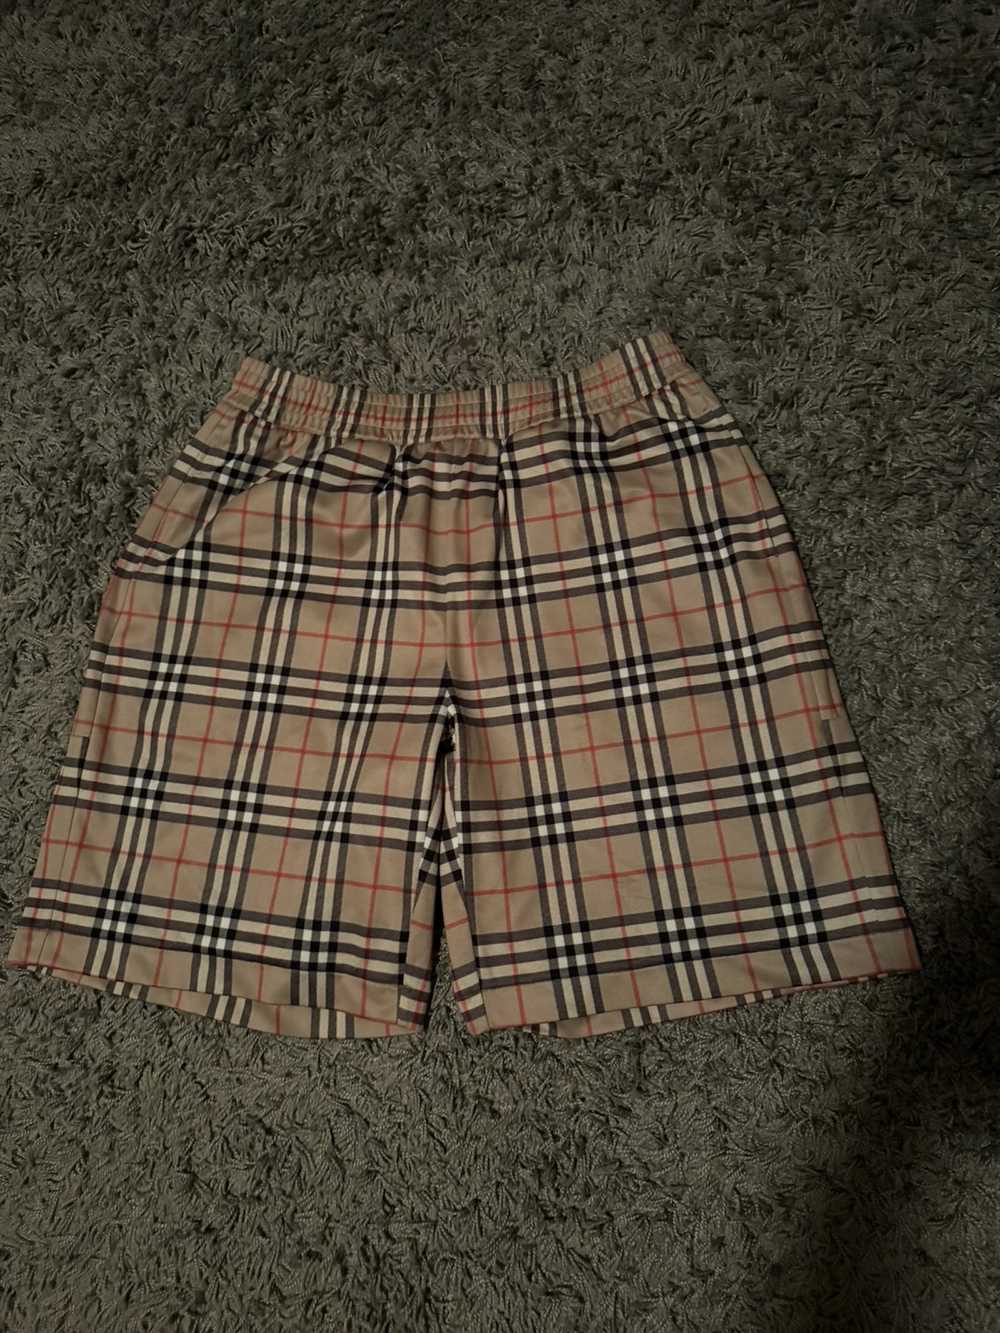 Burberry × Streetwear Burberry Checkered Shorts - image 1